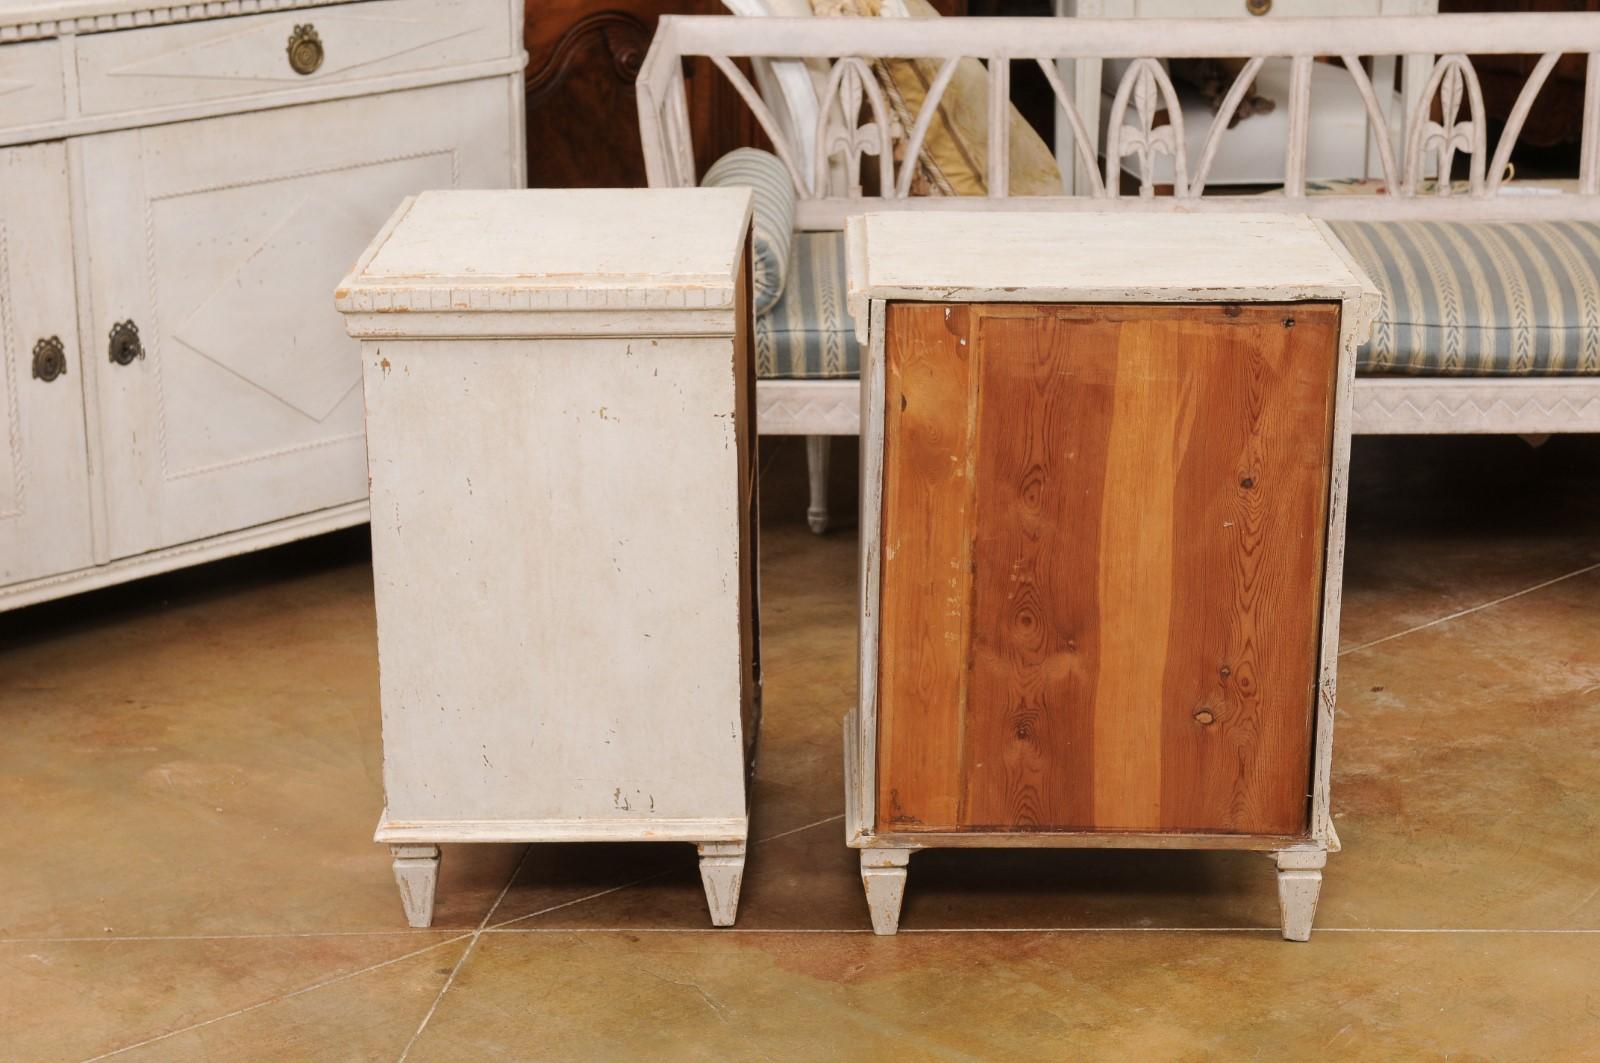 A pair of Swedish Gustavian style painted wood nightstand tables from the early 20th century, with carved diamond motifs, dentil molding and four drawers. Created in Sweden during the Turn of the Century which saw the transition between the 19th to